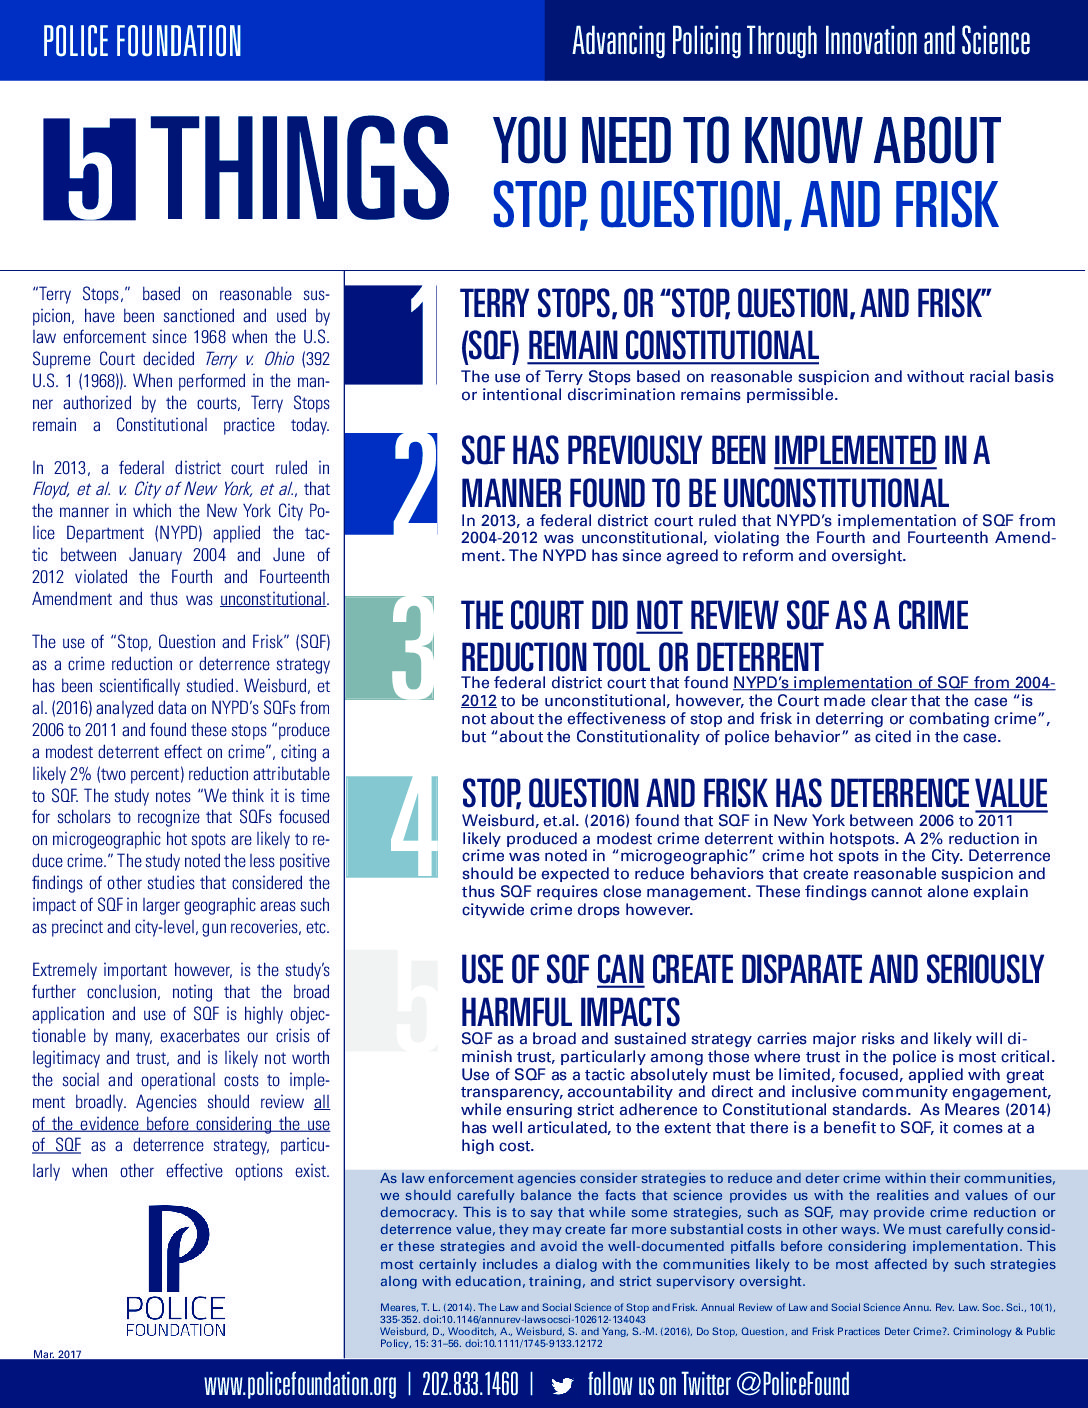 5 Things_Stop-Question-Frisk